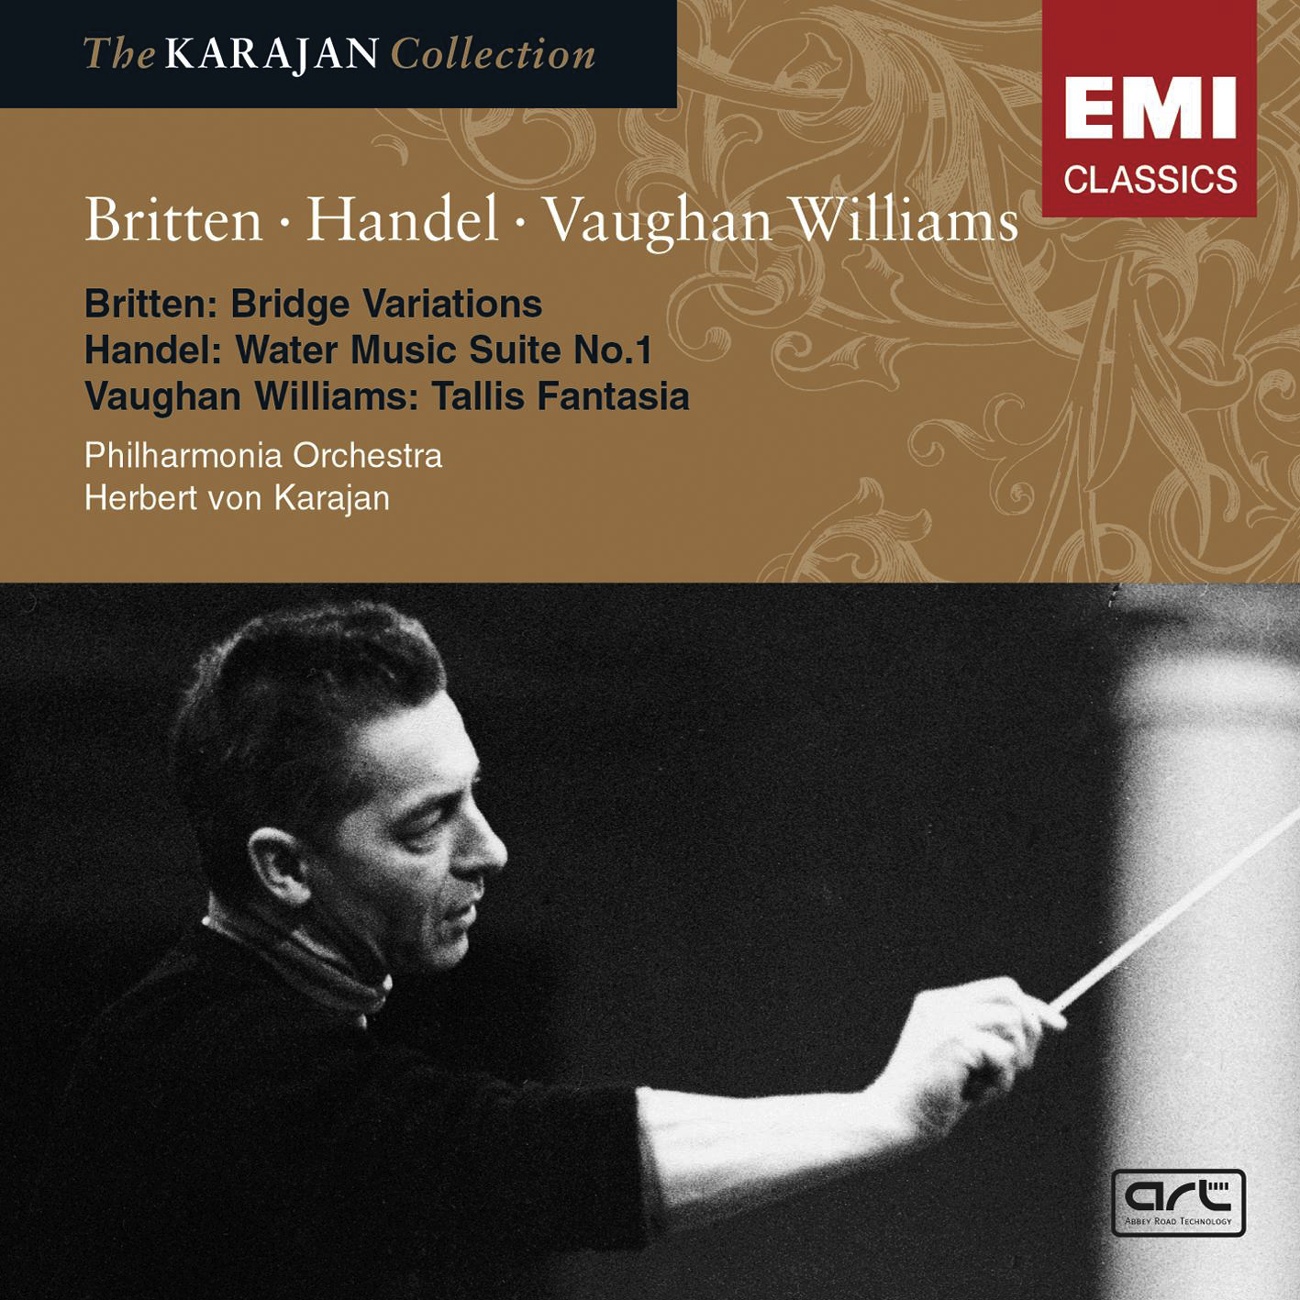 Britten: Variations on a theme by Frank Bridge; Vaughan Williams: Fantasia on a theme by Tallis; Handel: Water Music Suite